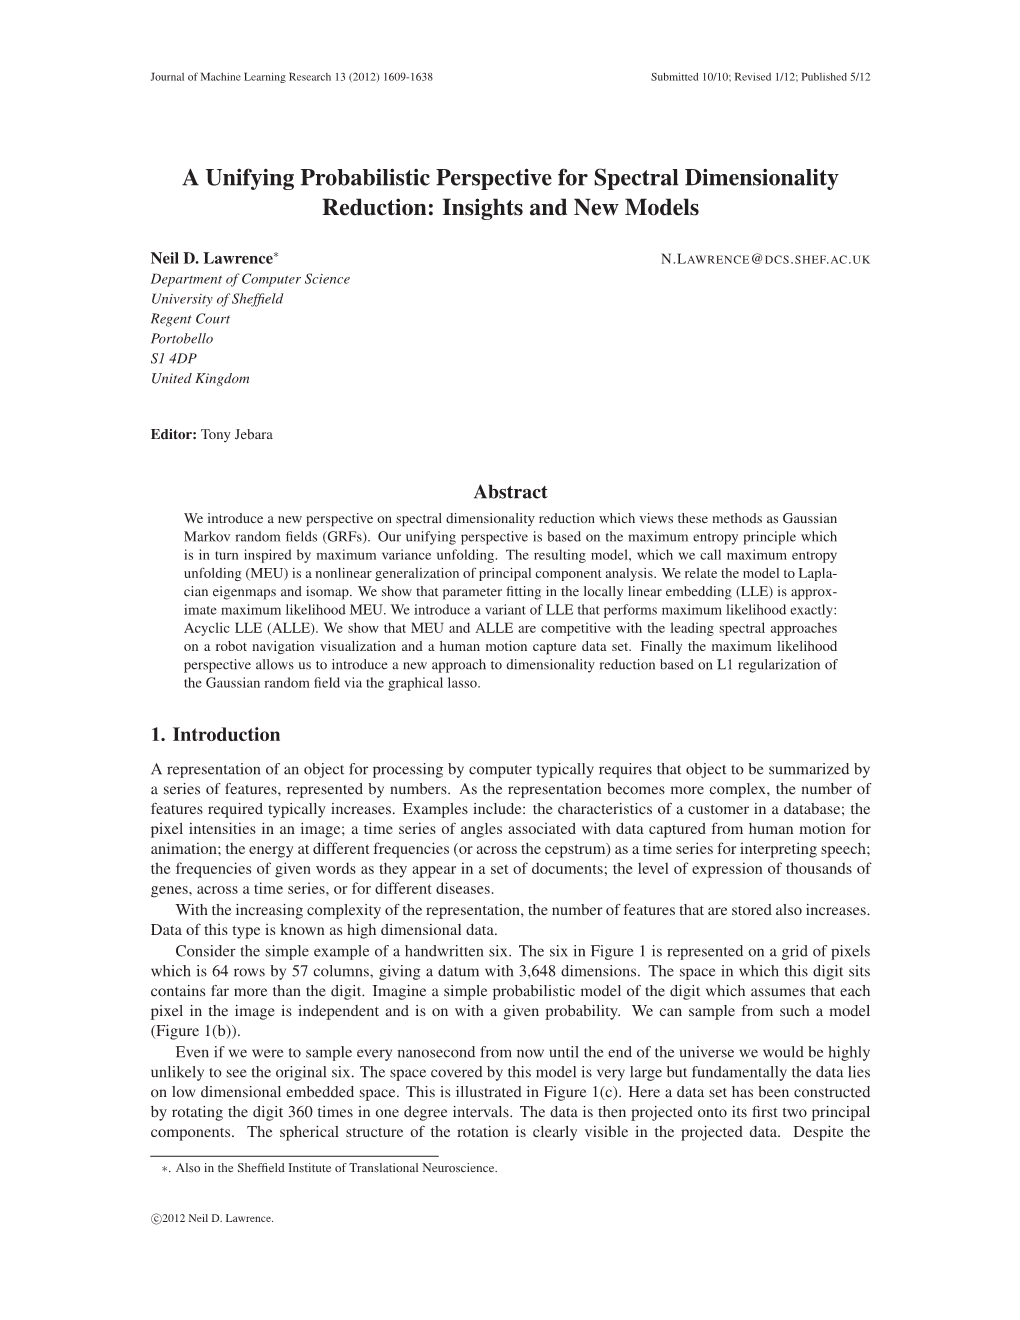 A Unifying Probabilistic Perspective for Spectral Dimensionality Reduction: Insights and New Models